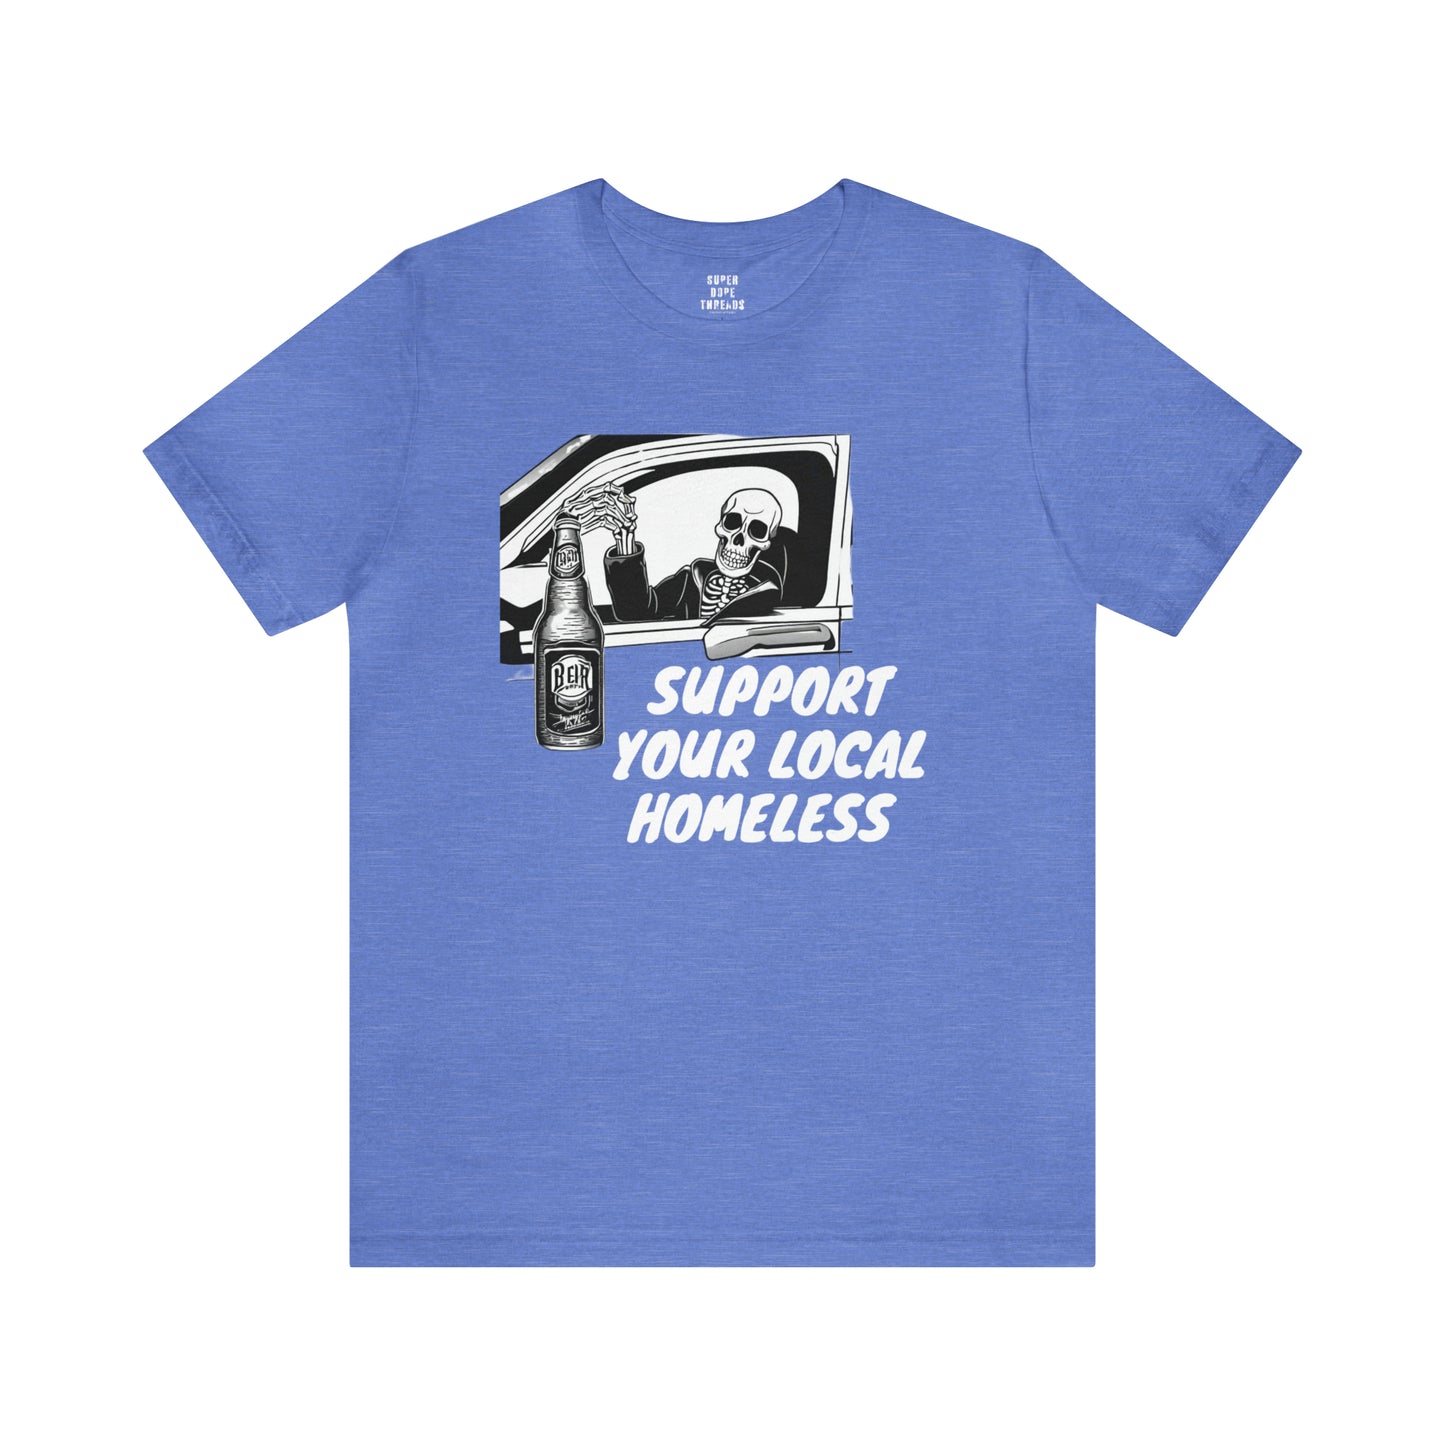 Super Dope Threads - Support Your Local Homeless